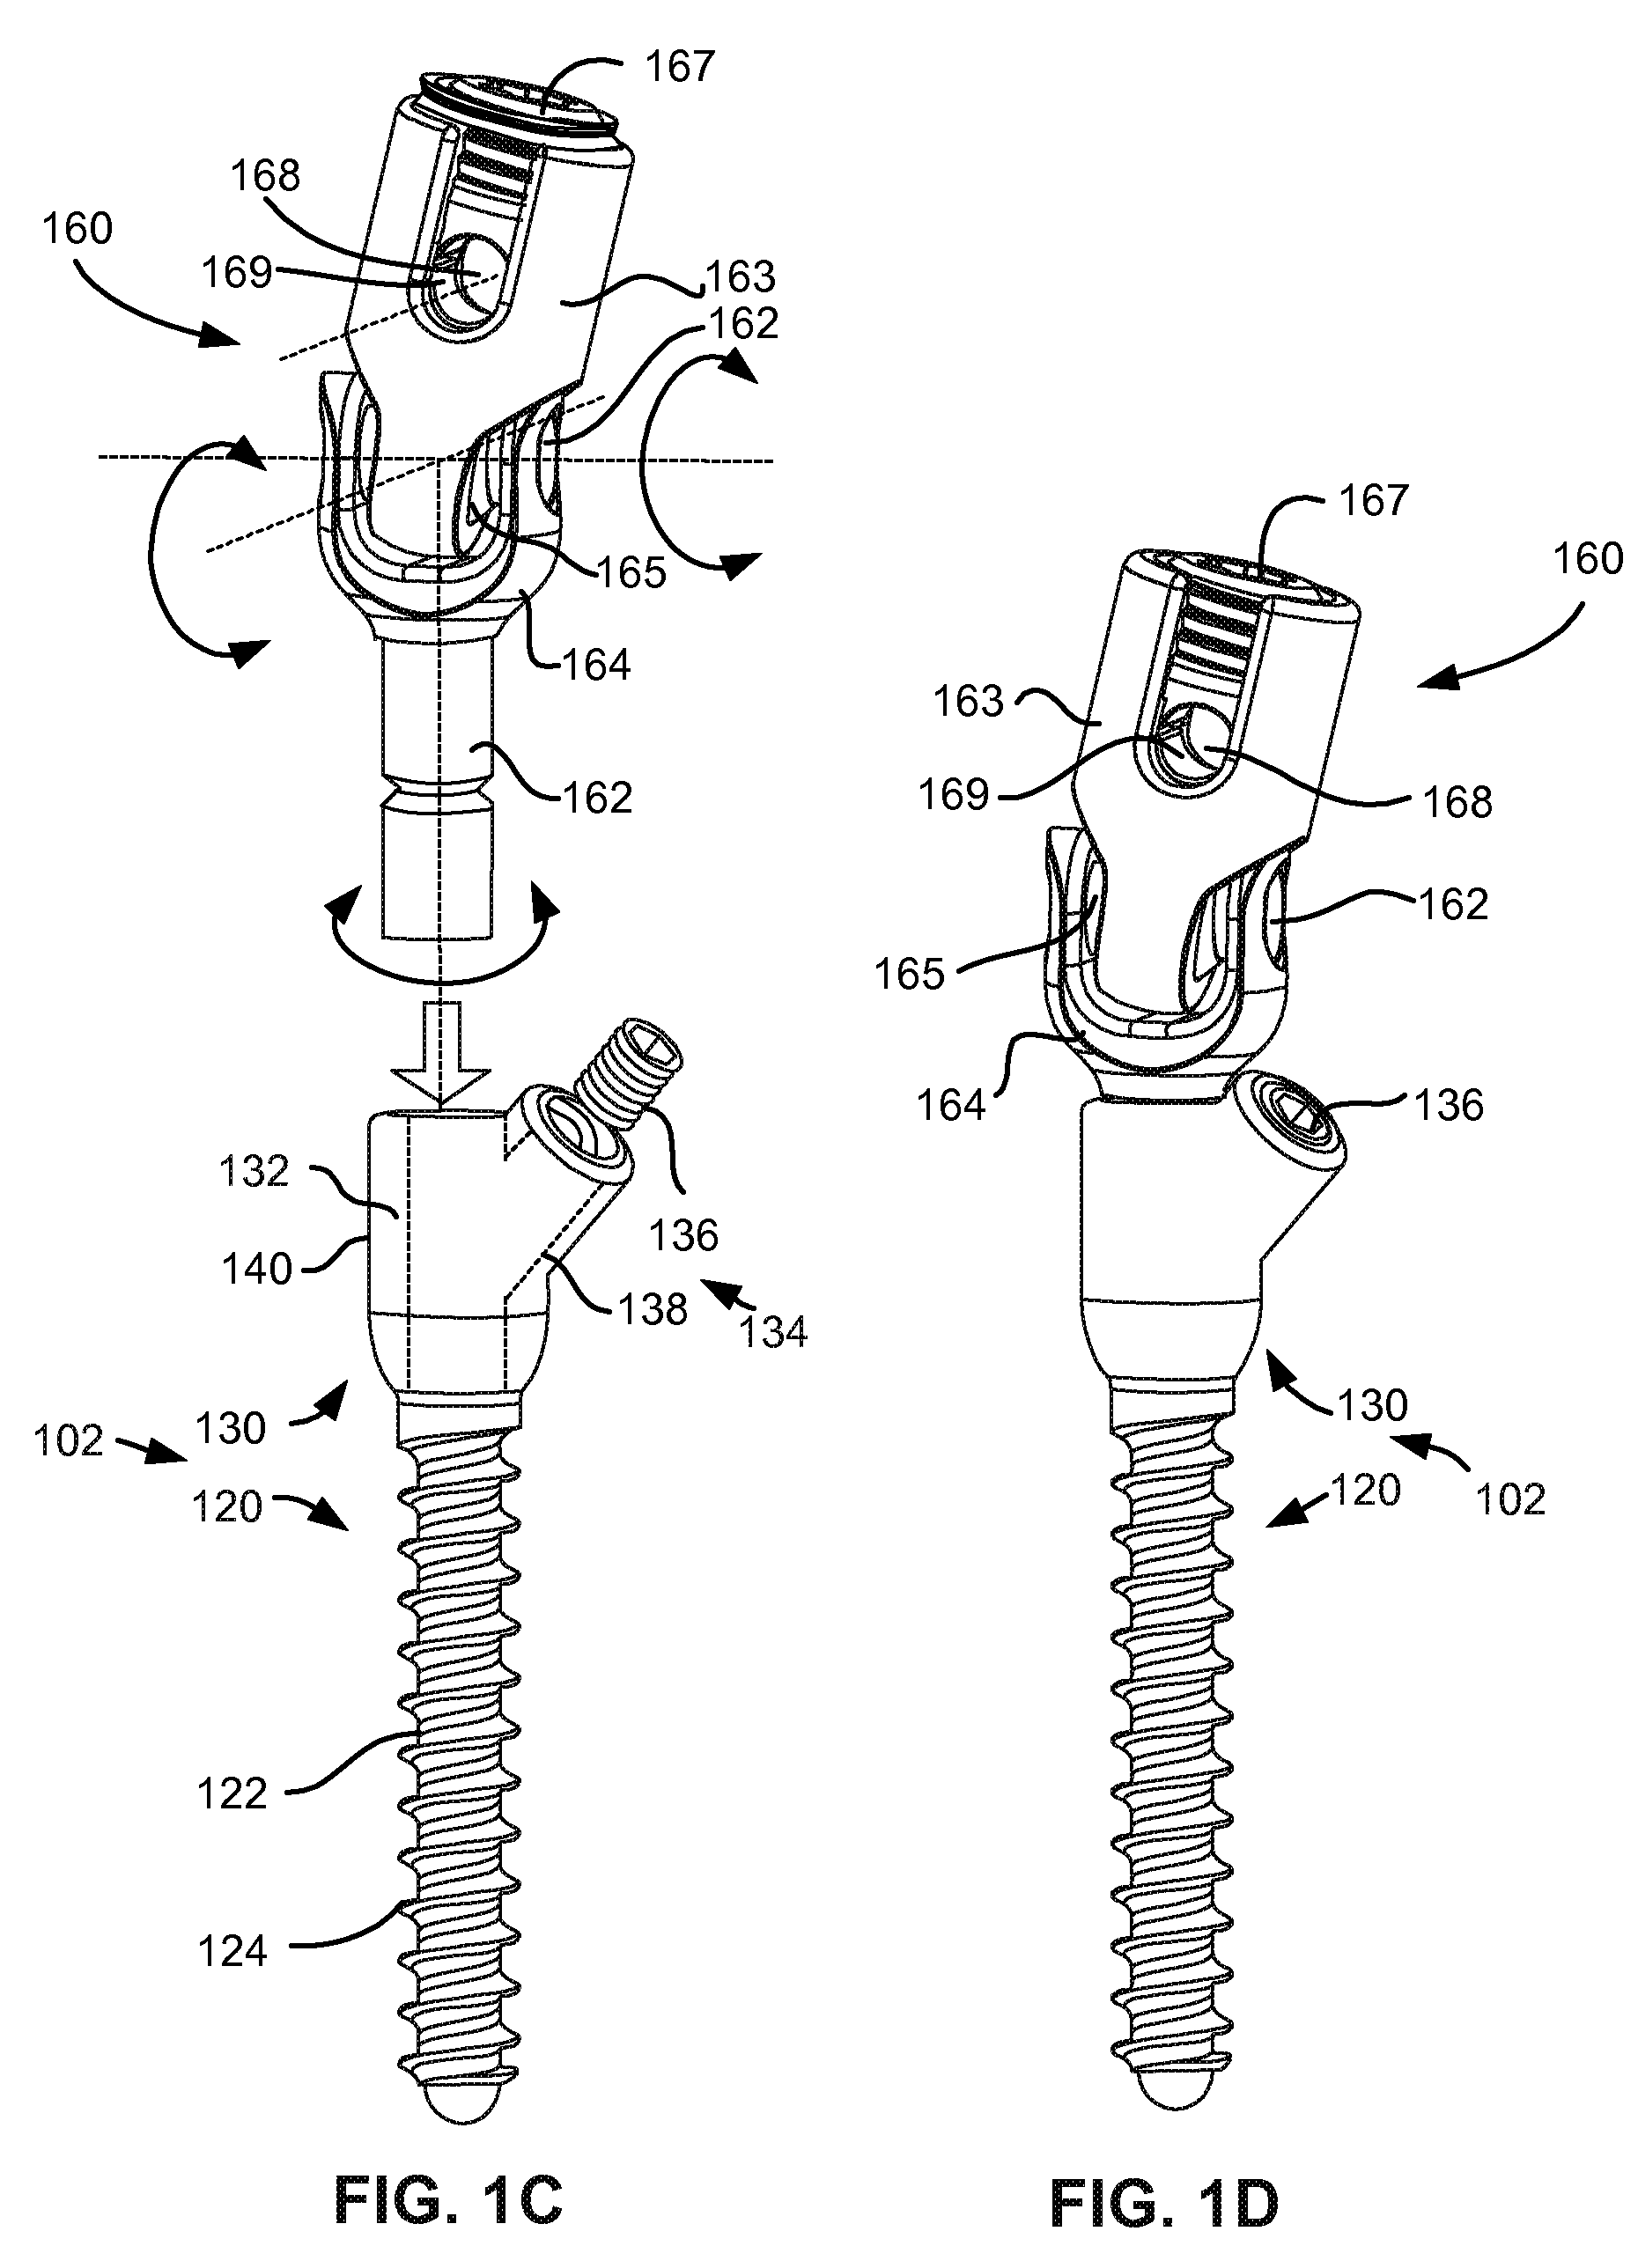 Versatile polyaxial connector assembly and method for dynamic stabilization of the spine